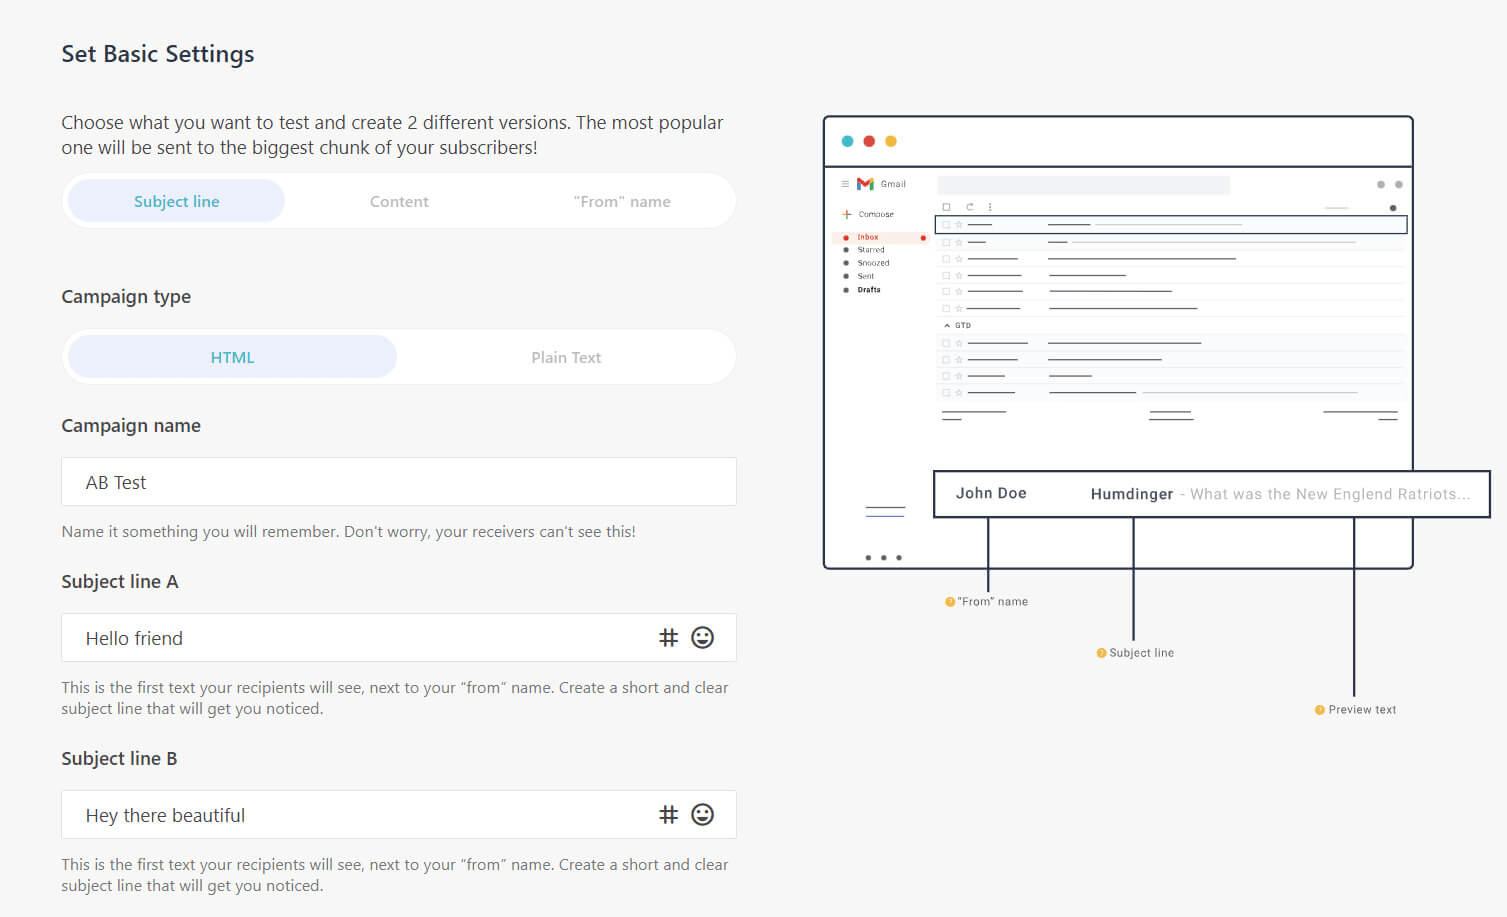 Moosend dashboard a/b testing feature example